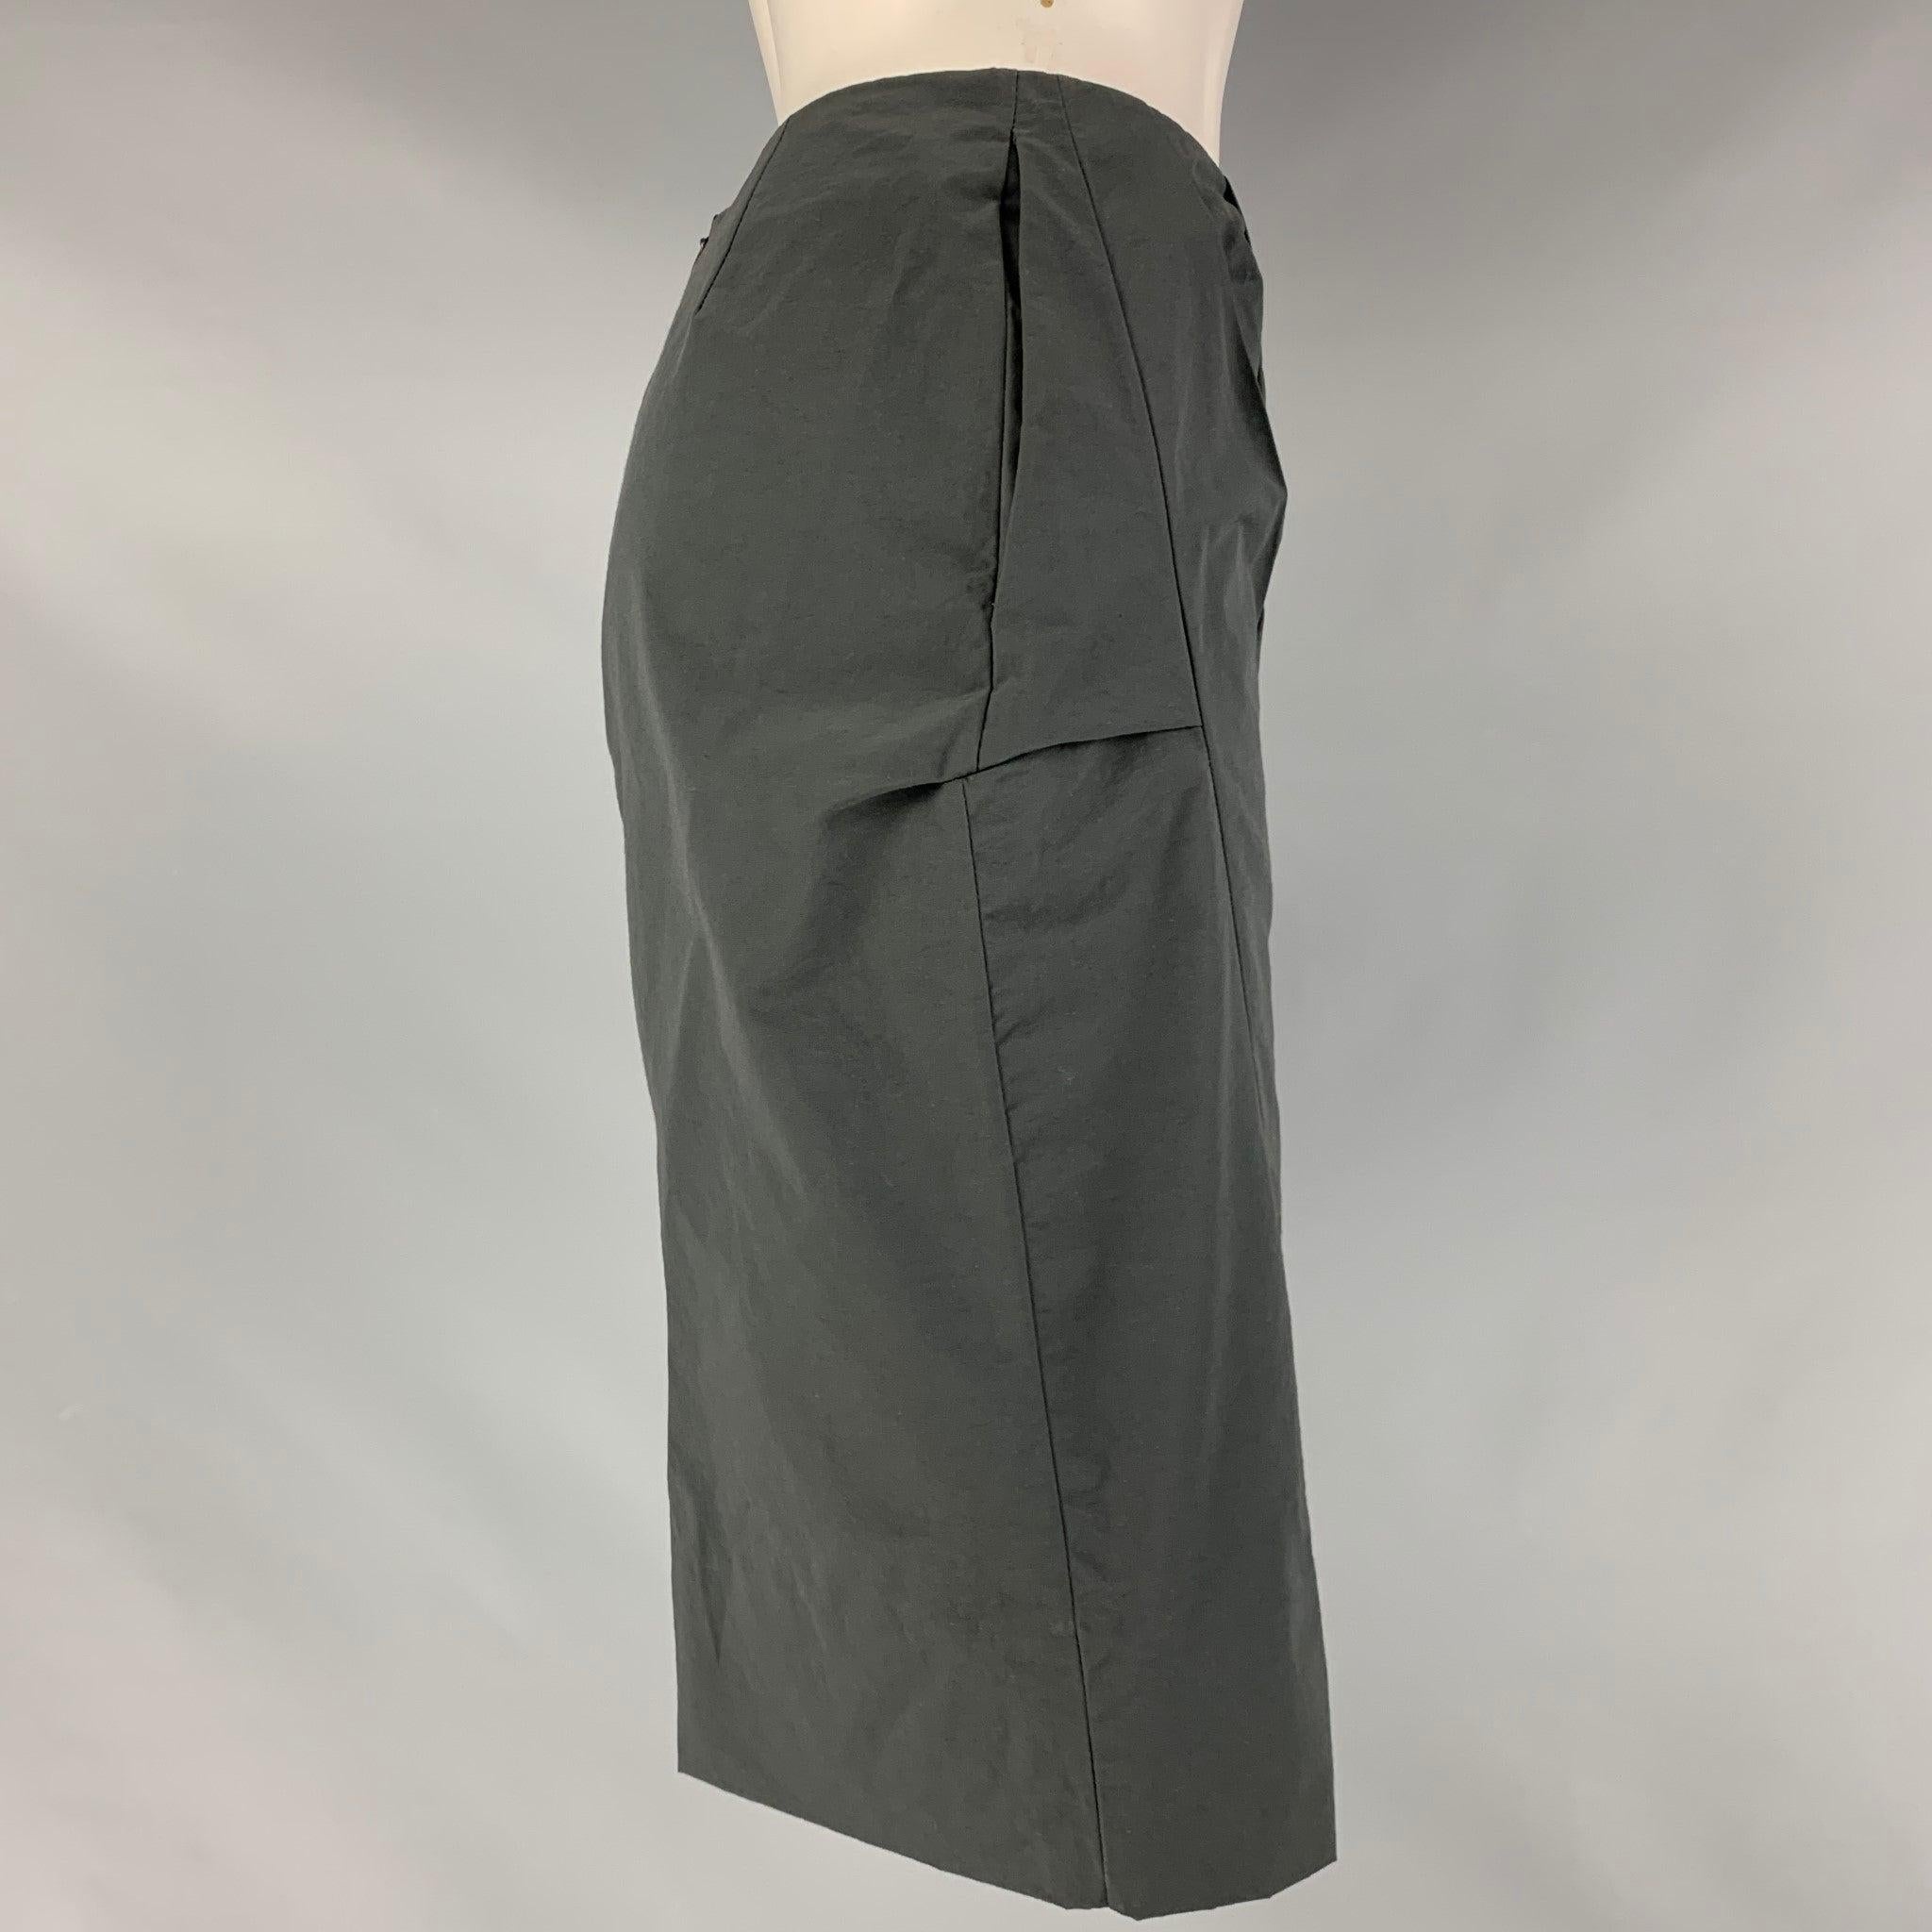 MARNI pencil skirt comes in a slate cotton and nylon fabric featuring an abstract pleats at front, frontal pockets, and a back zipper closure. Made in Italy.Excellent Pre-Owned Condition. 

Marked:   38 

Measurements: 
  Waist: 26 inches Hip: 35